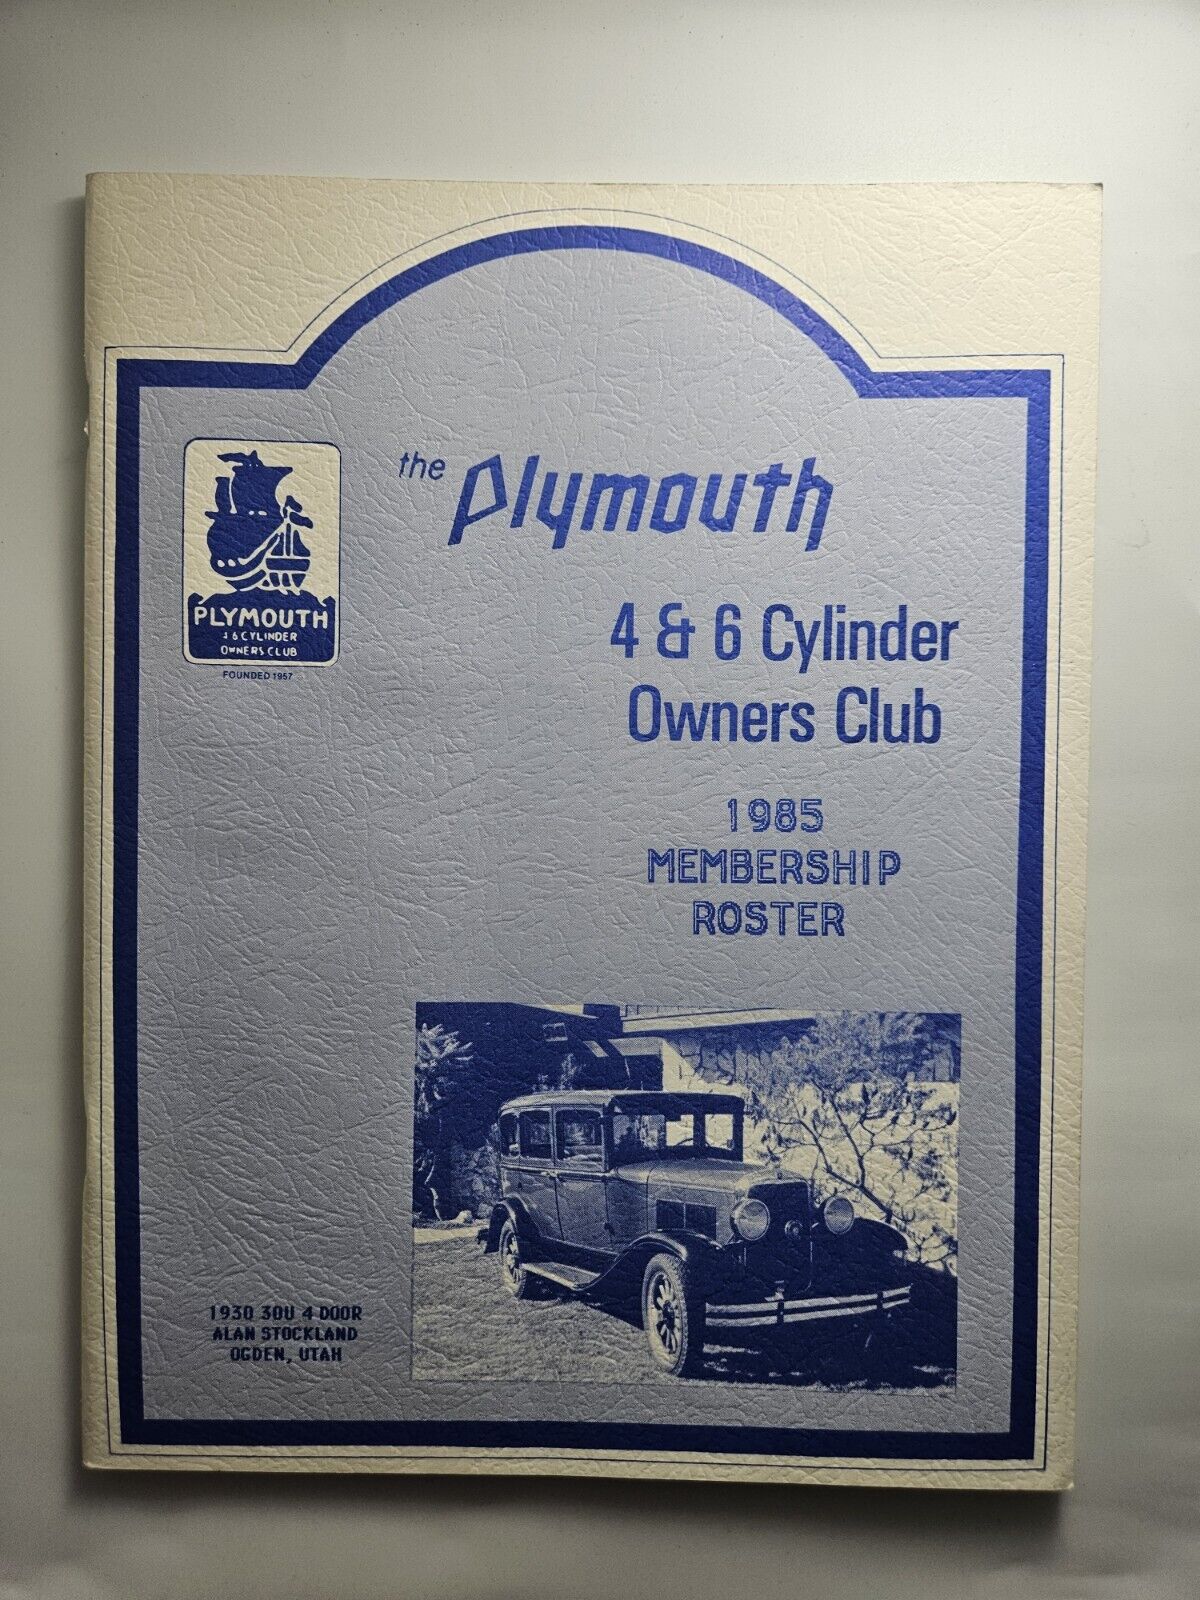 The Plymouth Owners Club 1985 Membership Roster